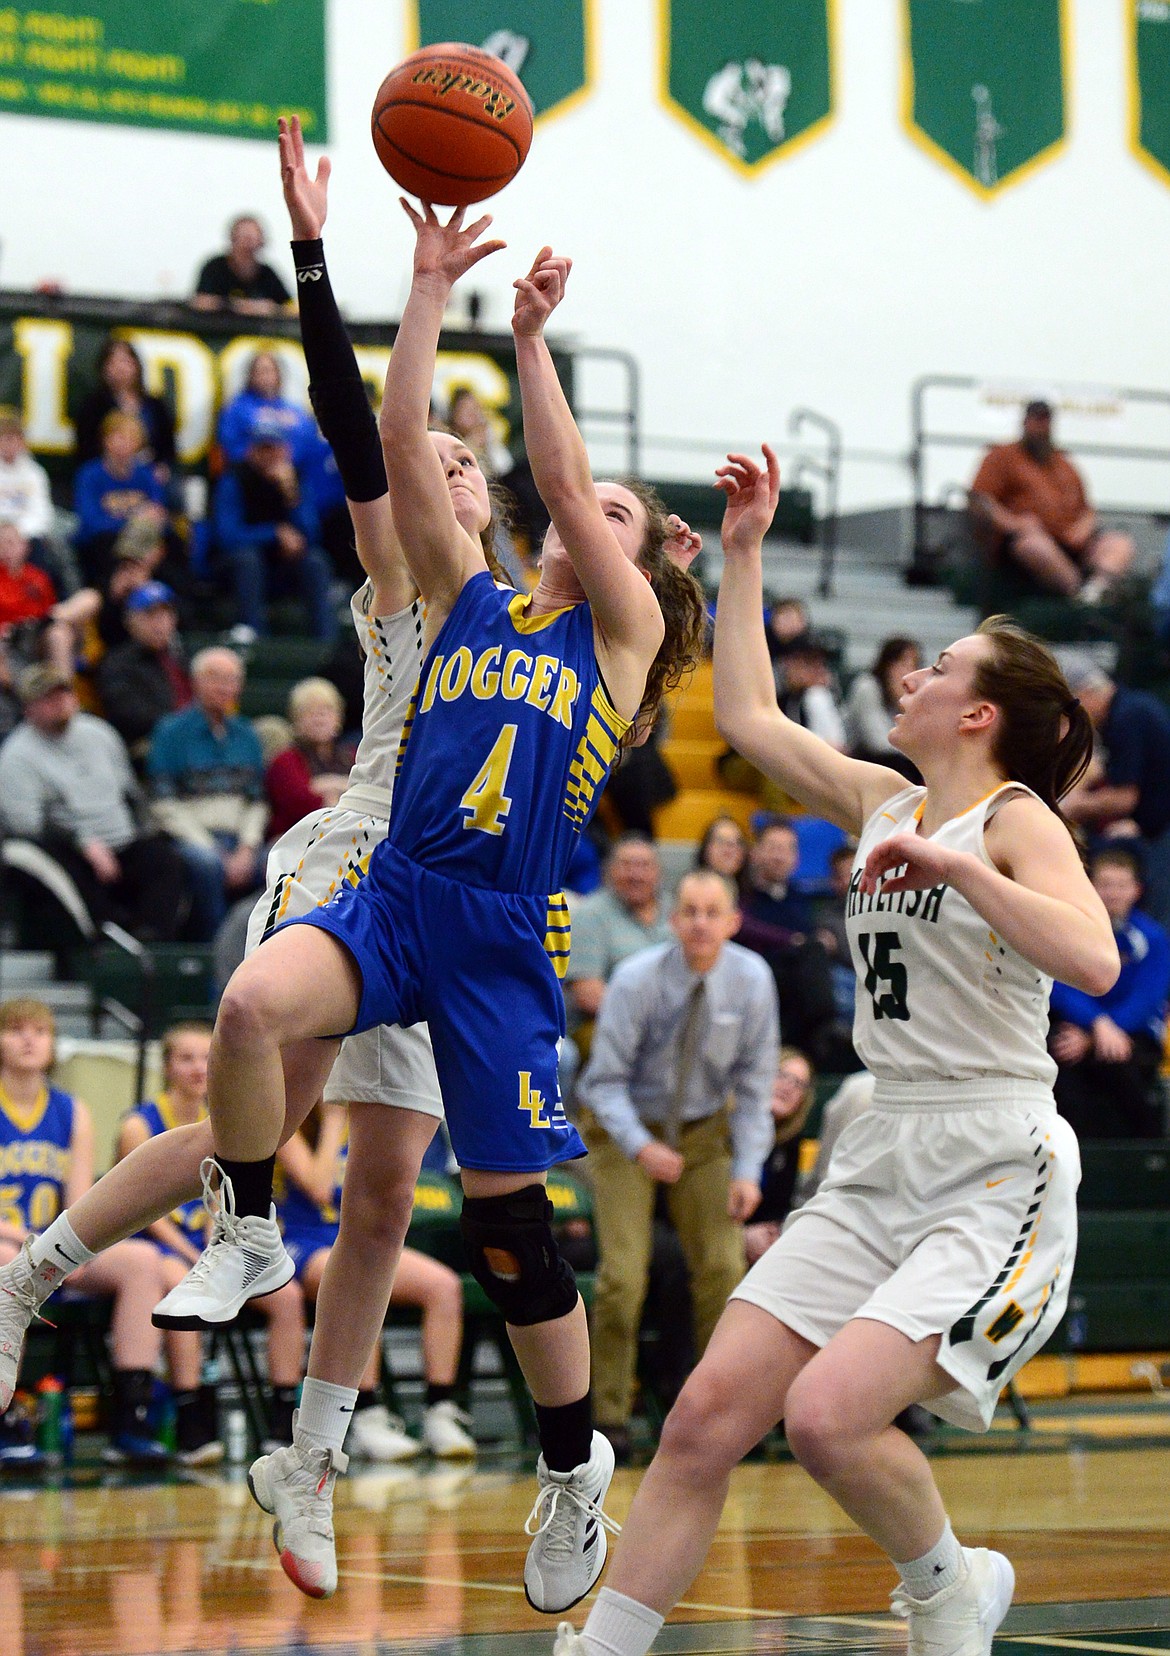 Libby's Emma Gruber (4) drives to the basket against Whitefish's Kaiah Moore (2) and Payton Kastella (15) at Whitefish High School on Thursday. (Casey Kreider/Daily Inter Lake)